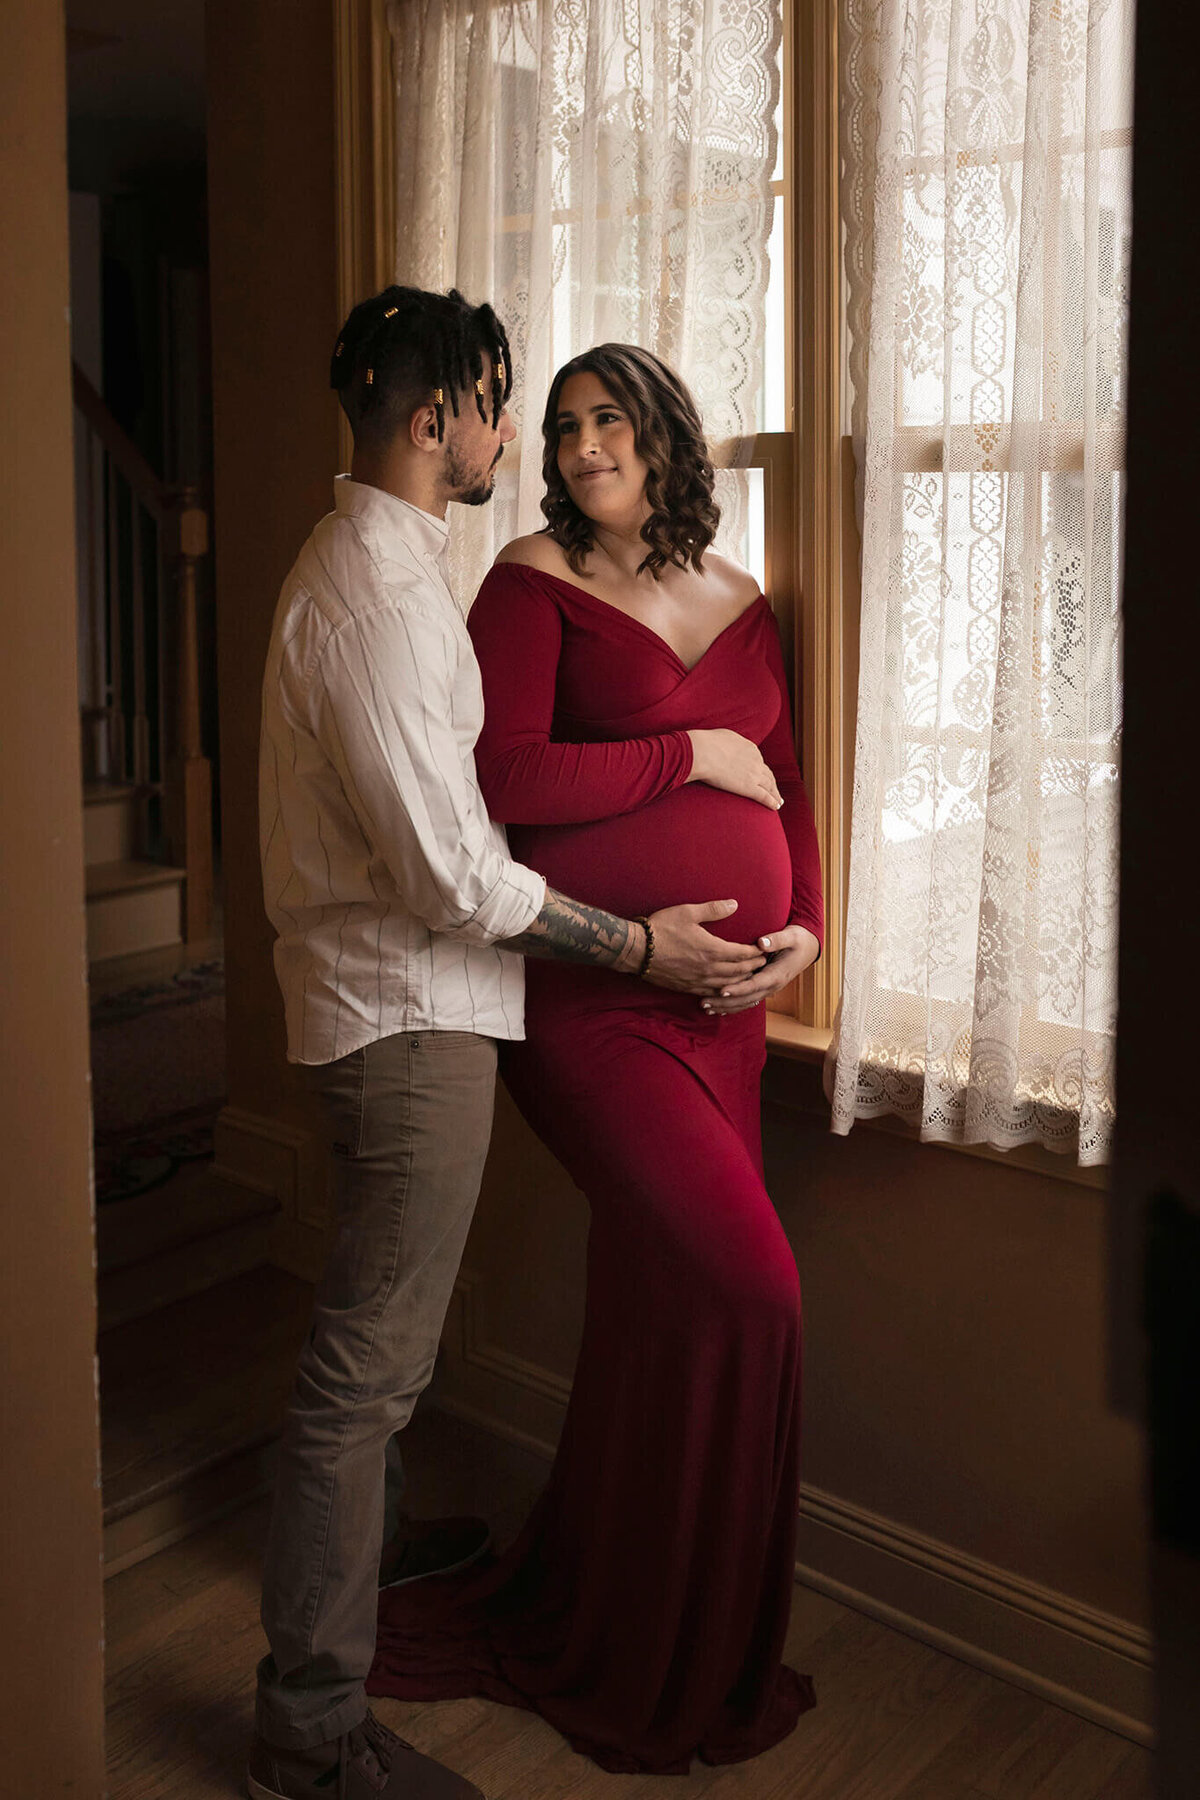 NJ couples photographer captures husband and wife before they welcome baby